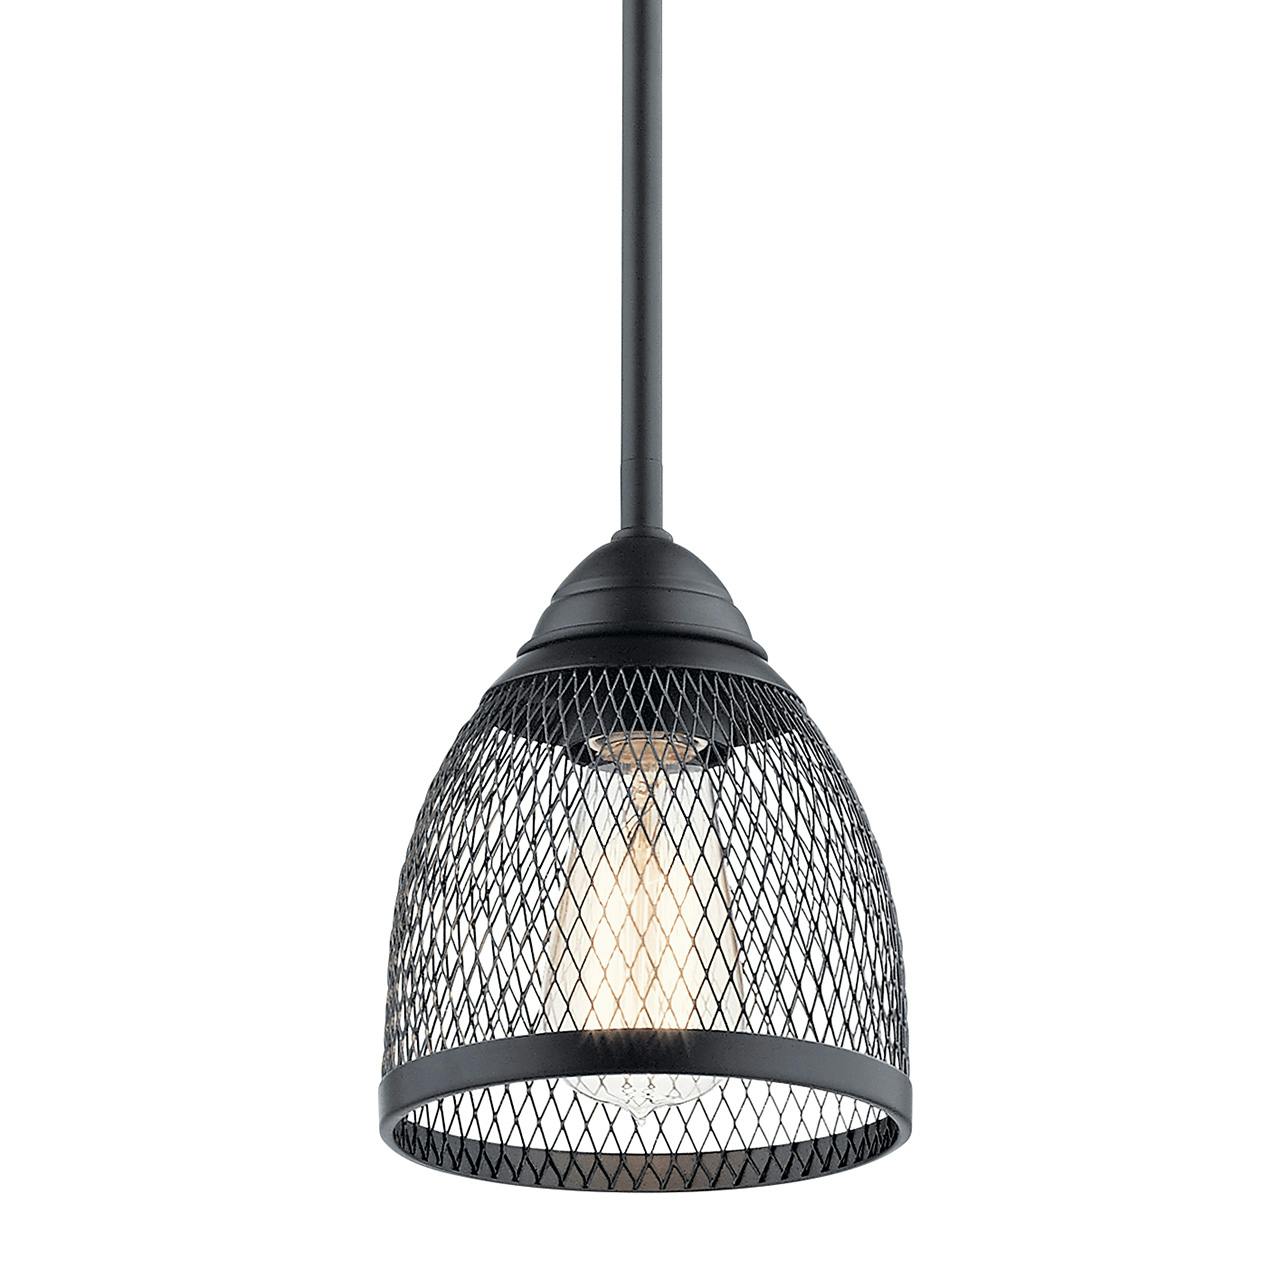 Voclain 7.75" Mini Pendant Black without the canopy on a white background